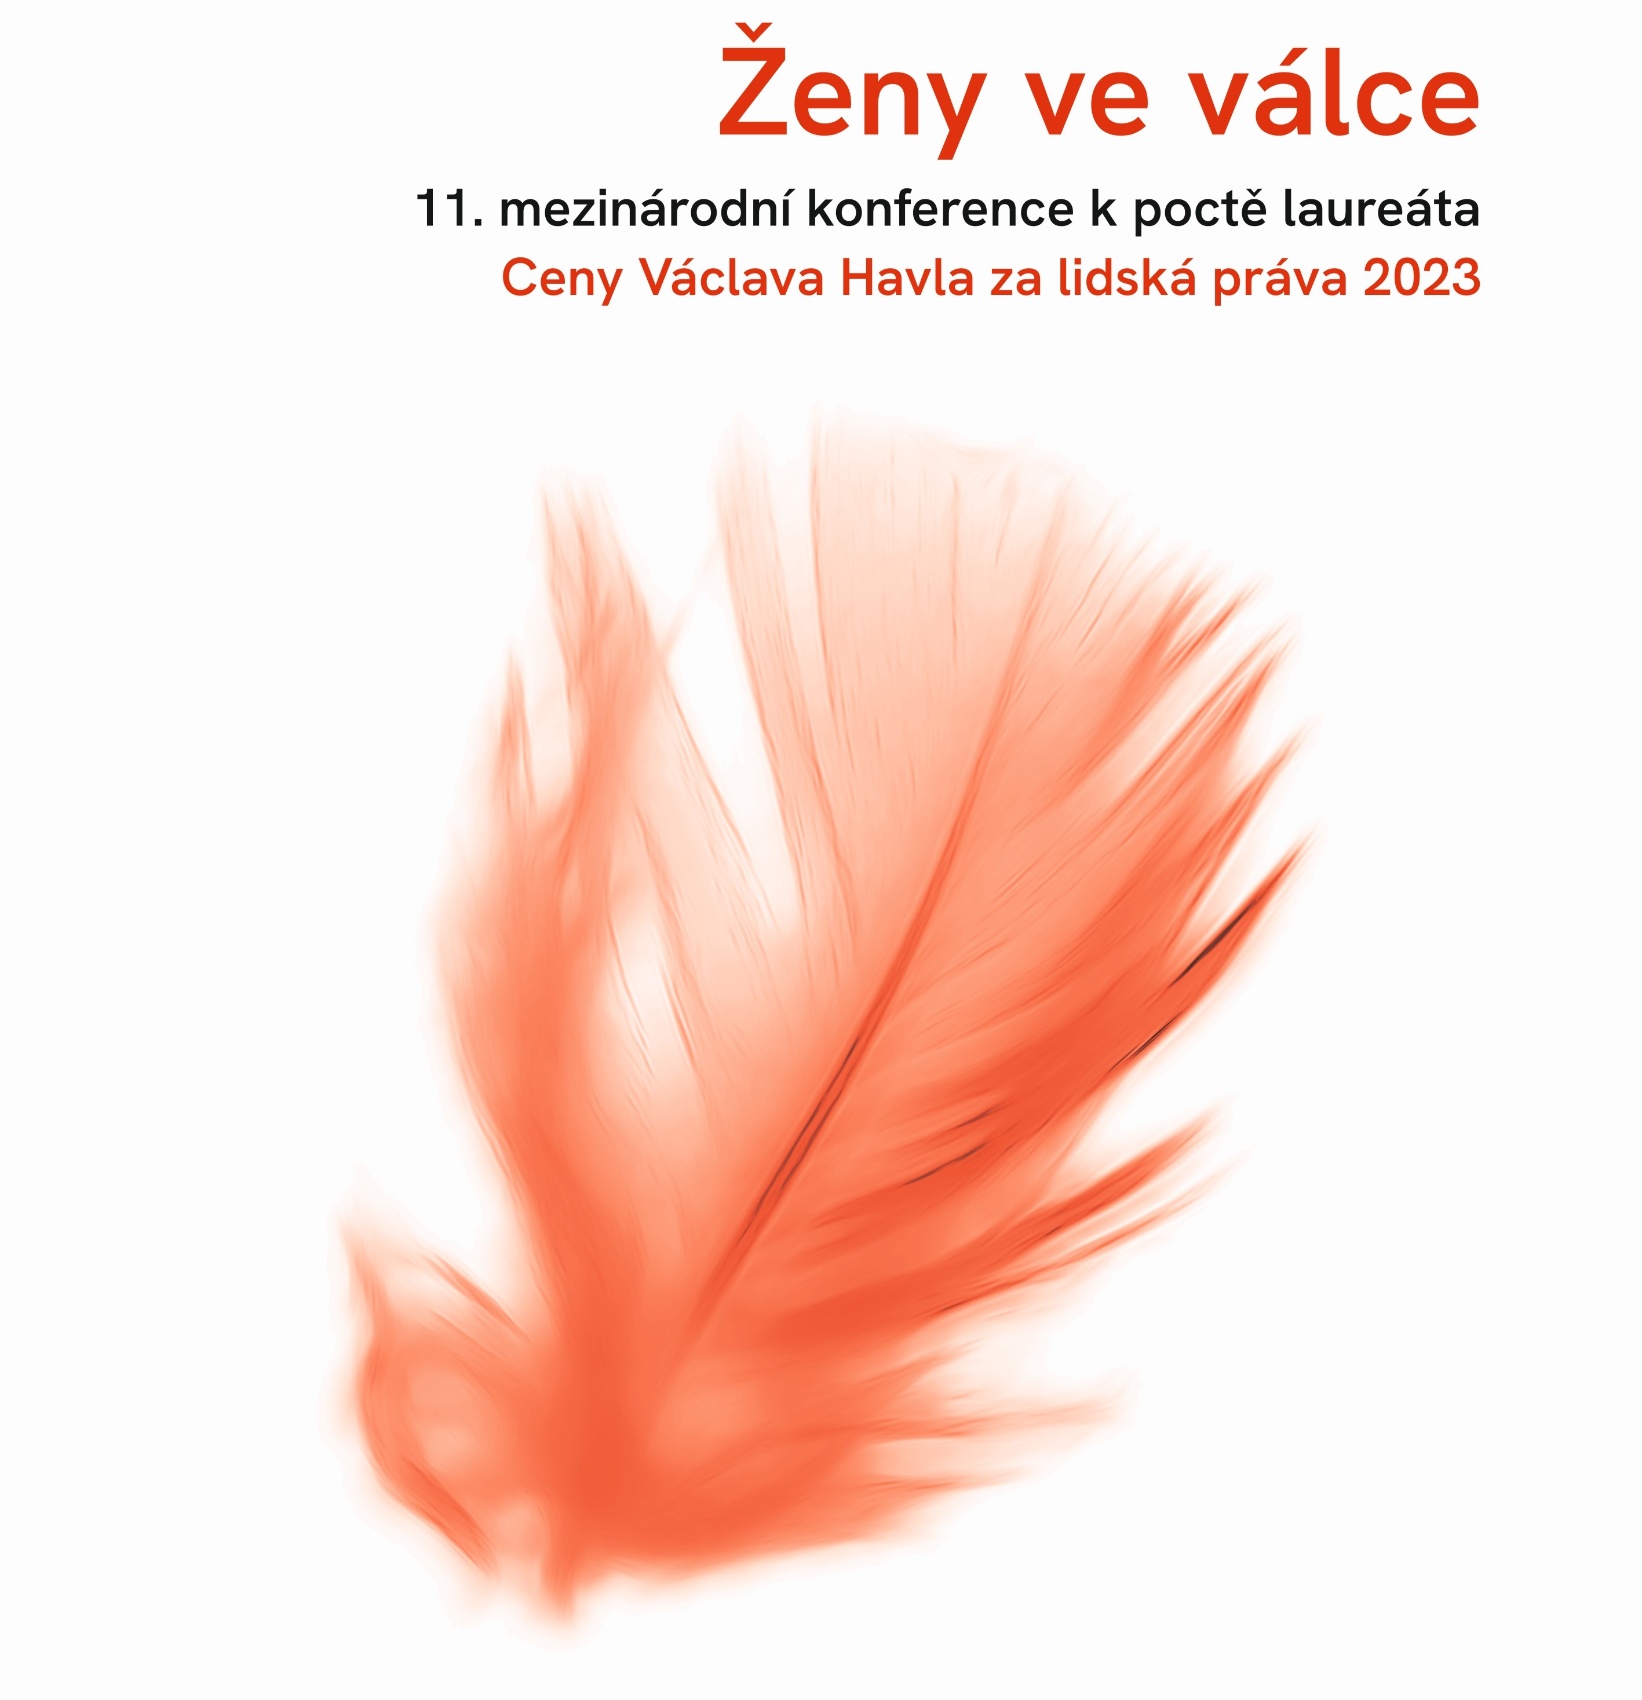 11th international conference in honour of the laureate of the 2023 Václav Havel Human Prize